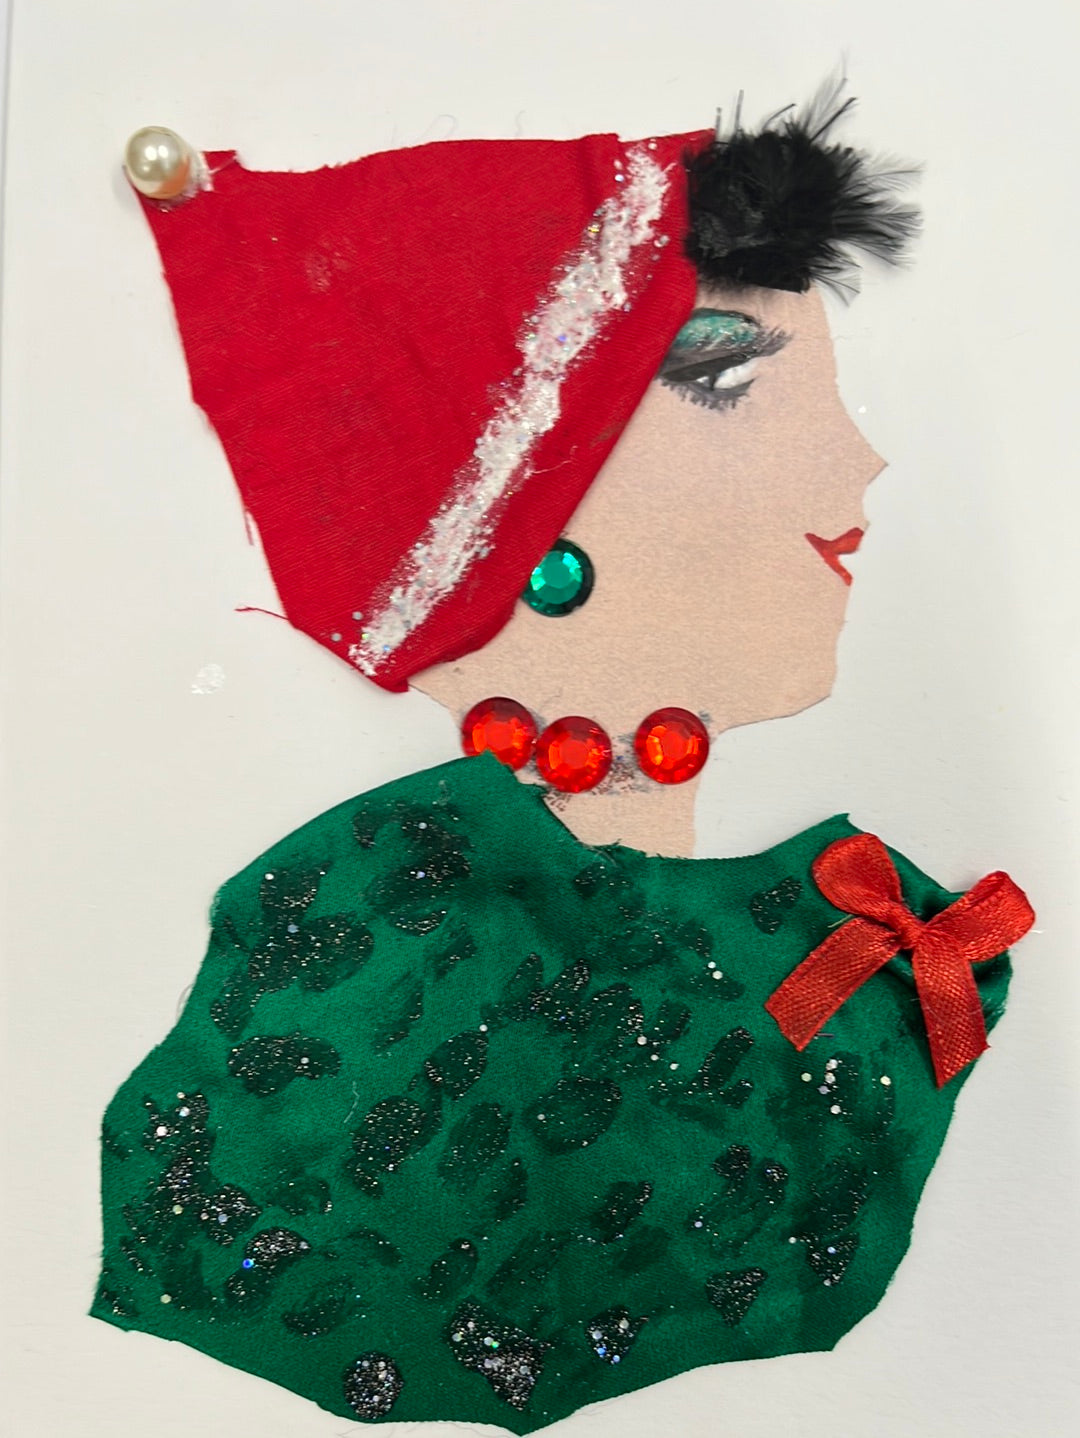 This card is called Christmas Elf. She wears a sparkly green blouse with a red bow, and a red santa hat. 